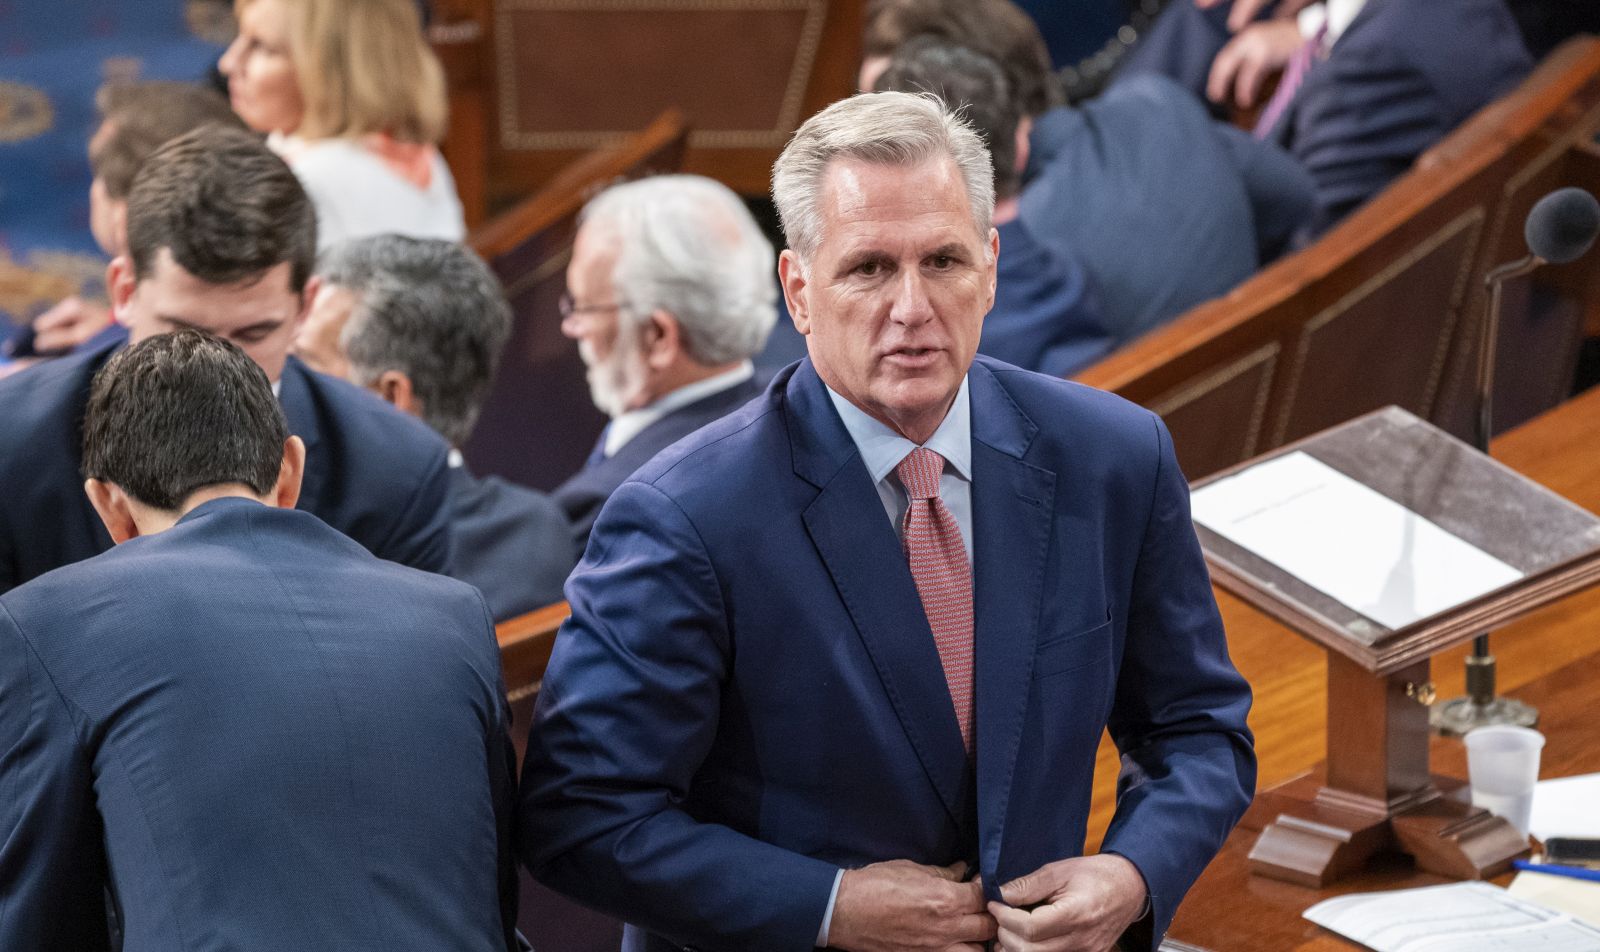 epa10387646 House Republican Leader Kevin McCarthy during first ballot vote tabulation for Speaker of the House during the opening session of the 118th Congress on the House floor in the US Capitol in Washington, DC, USA, 03 January 2023.  House Republican Leader Kevin McCarthy is facing serious opposition from his own Republican caucus putting his bid for Speaker of the House in jeopardy.  EPA/SHAWN THEW